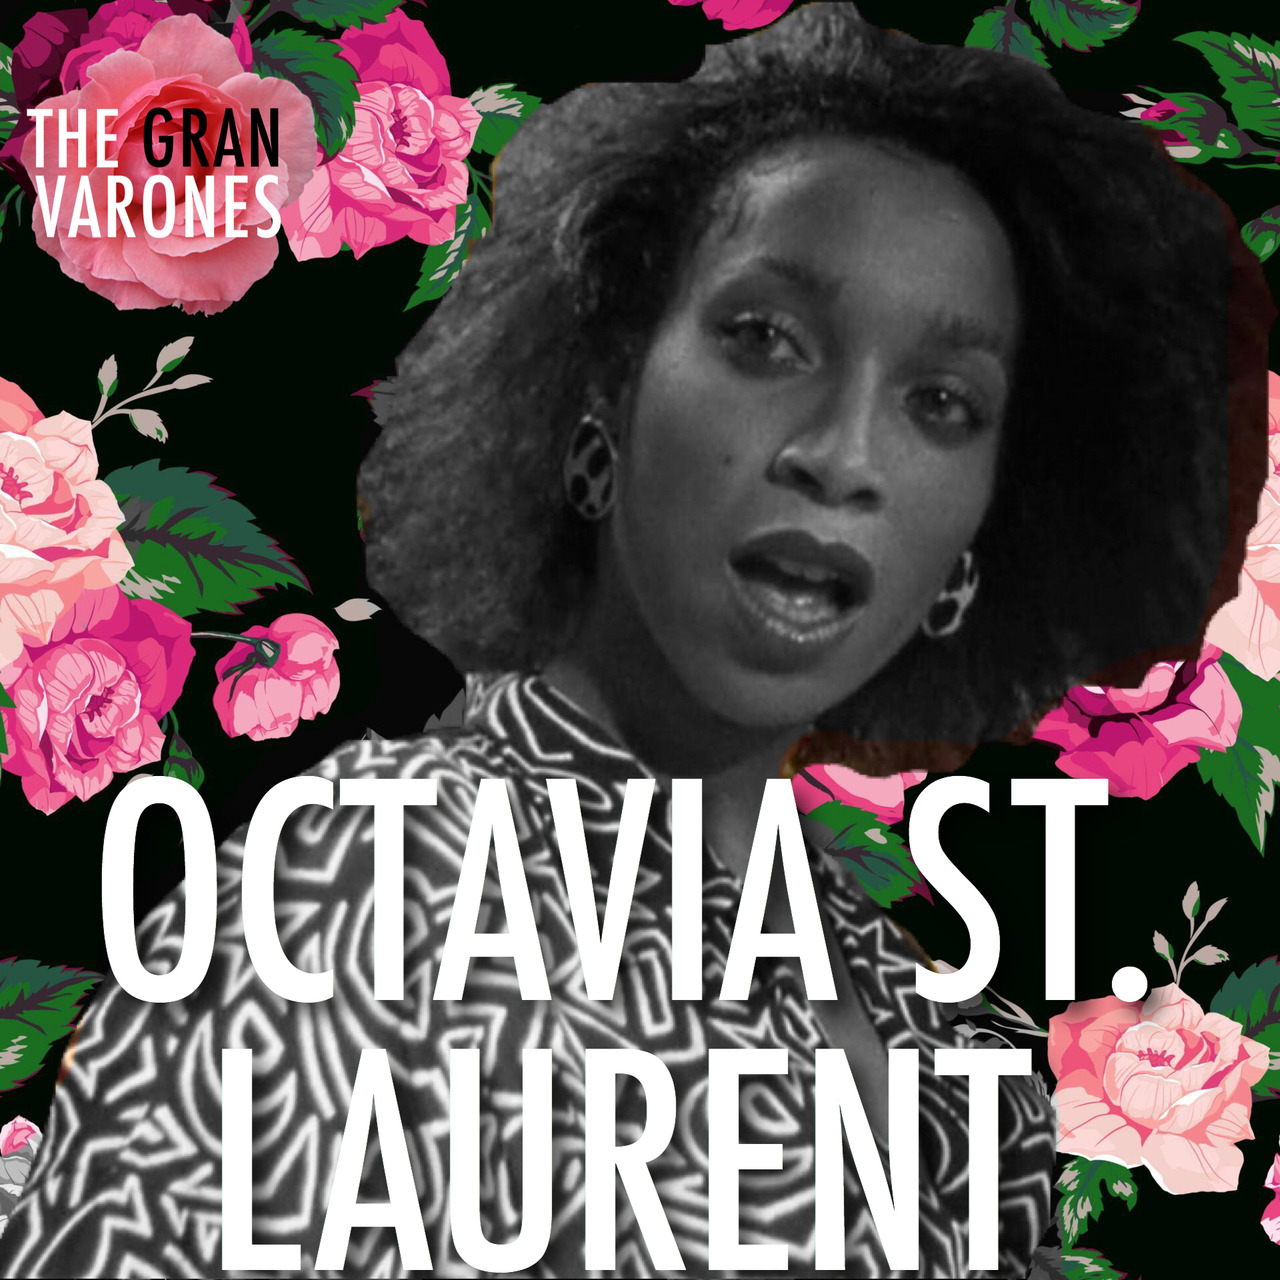 today we remember, celebrate and speak the name of octavia st. laurent. born on march 16, 1964, octavia would go on to become one of the most ICONIC ballroom figures in the history.
octavia st. laurent, after slaying runways in the ballroom scene for...